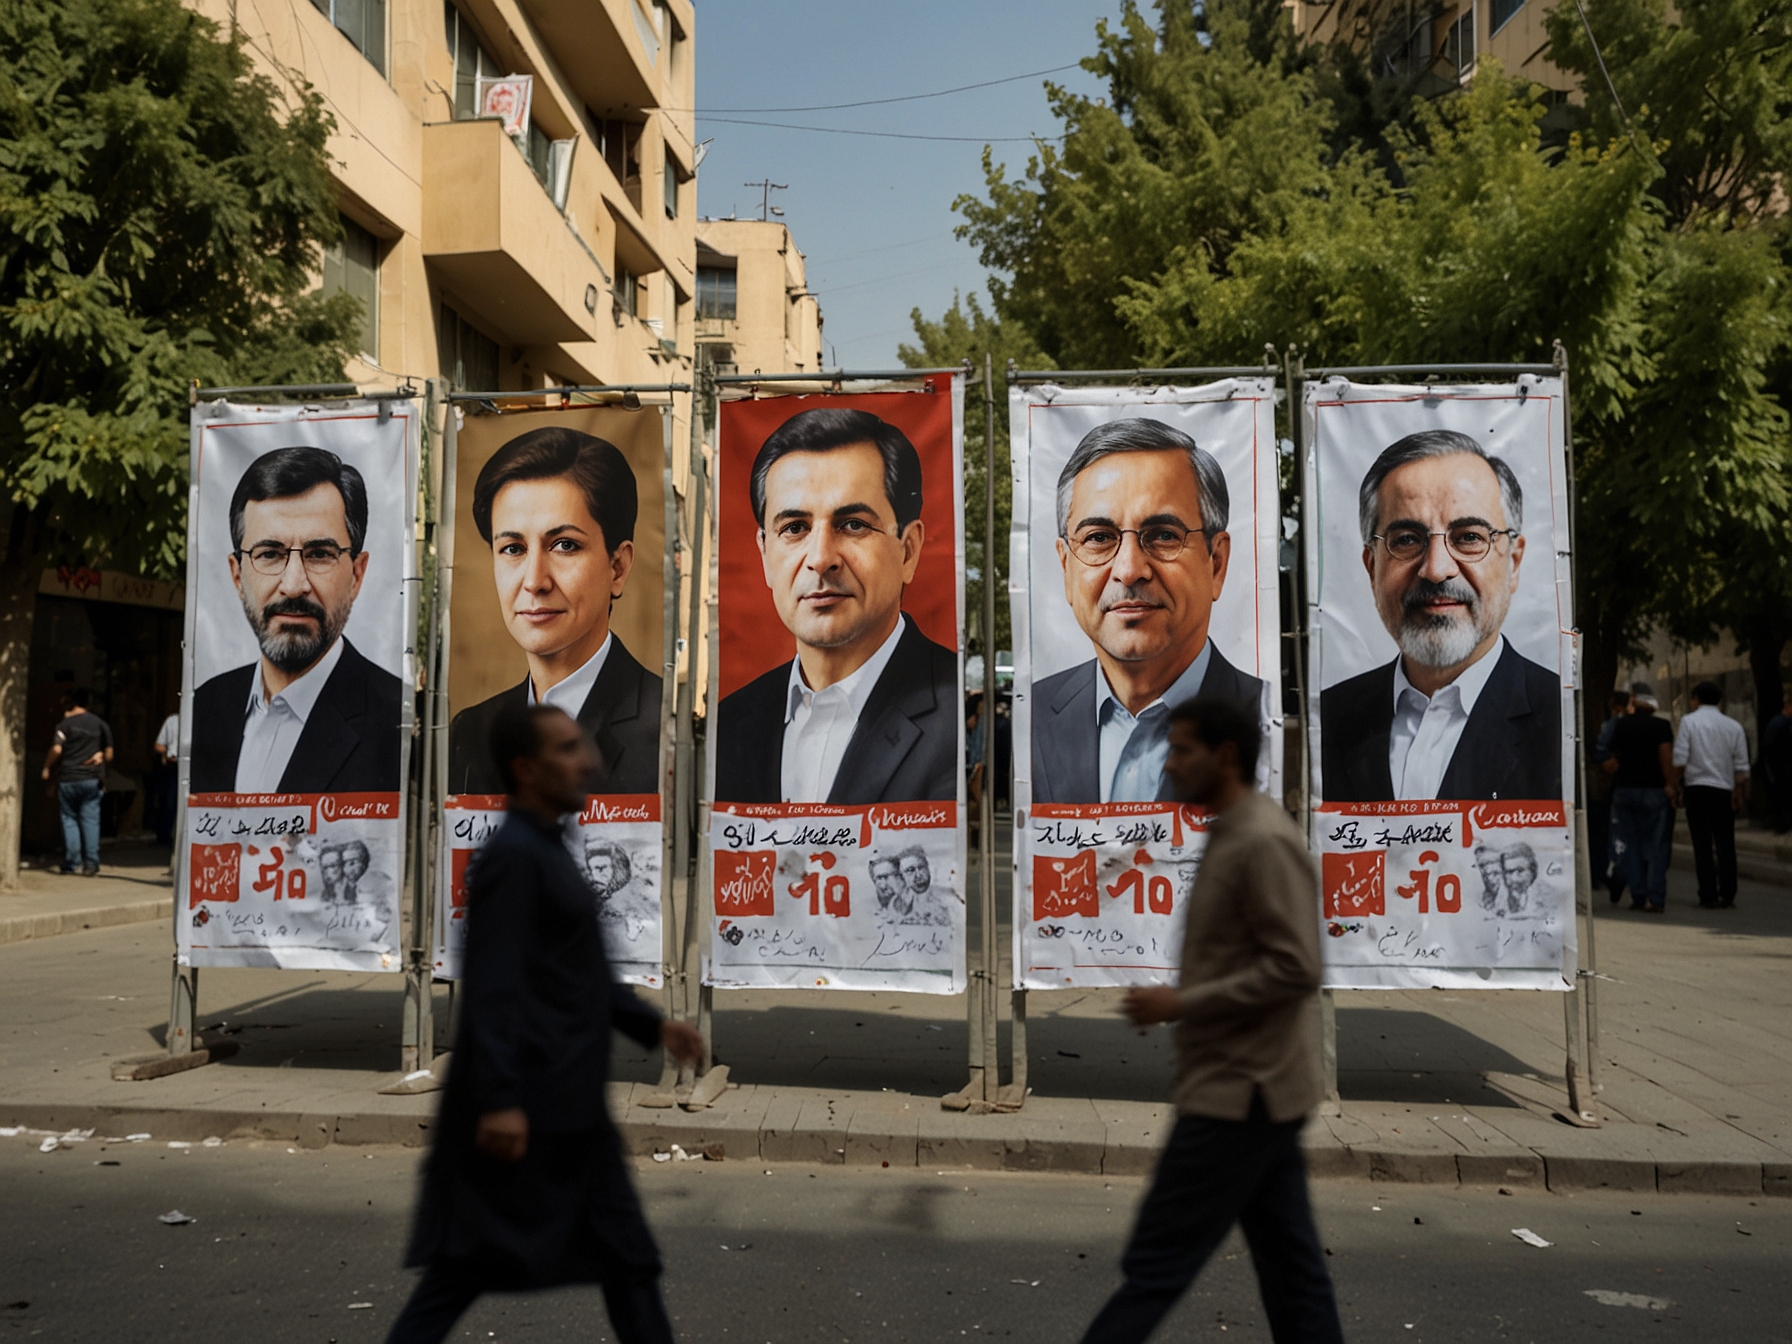 Campaign posters of anti-Western hardliner candidates displayed in a busy Tehran street, symbolizing the shift in political momentum and public sentiment.